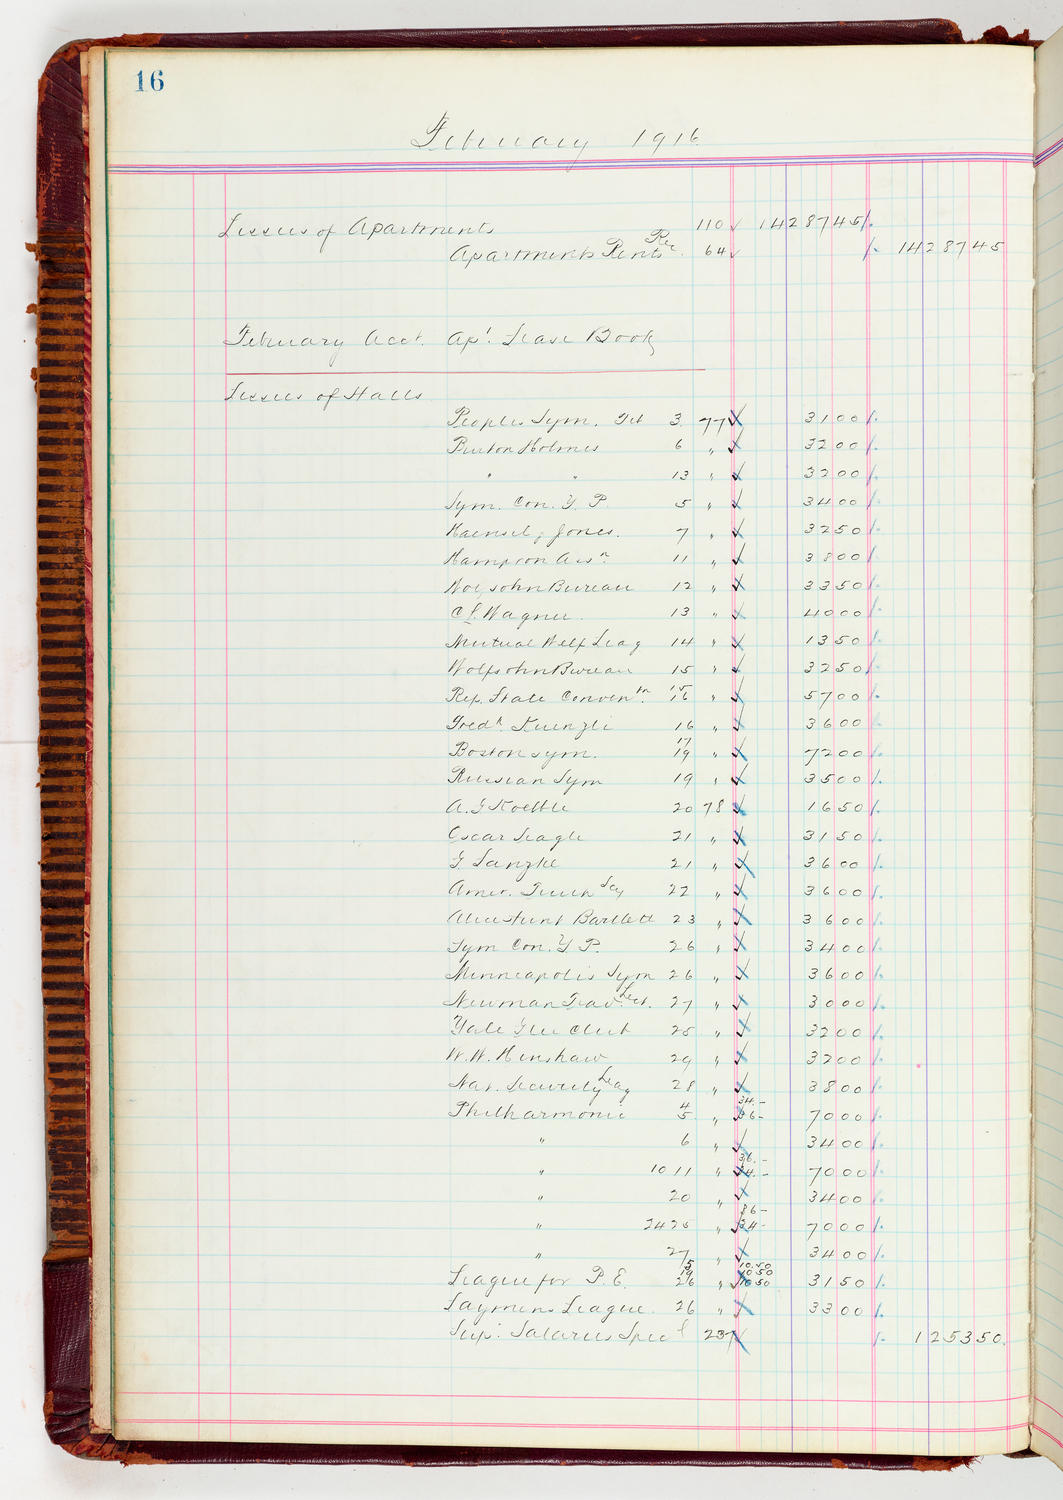 Music Hall Accounting Ledger, volume 5, page 16